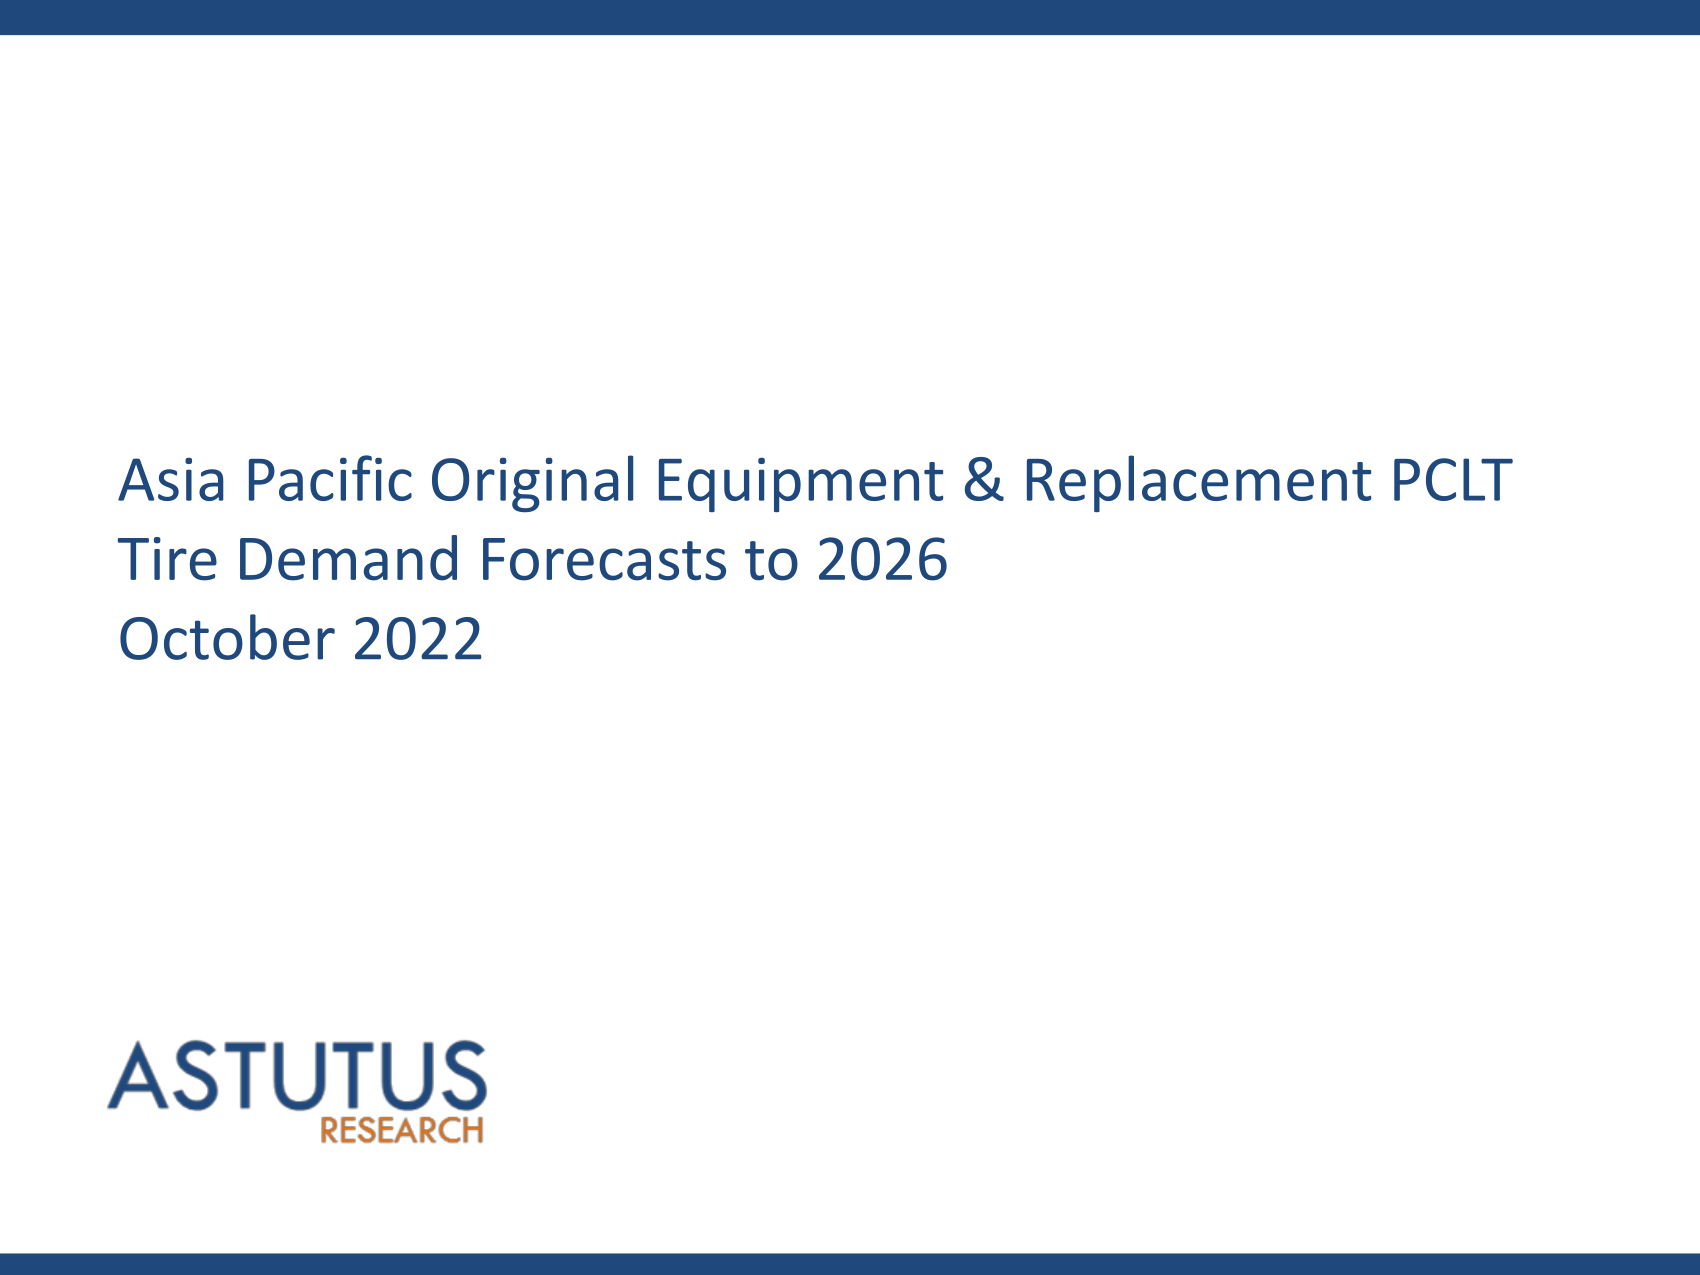 Asia Pacific Original Equipment & Replacement PCLT Tire Market Forecasts to 2026